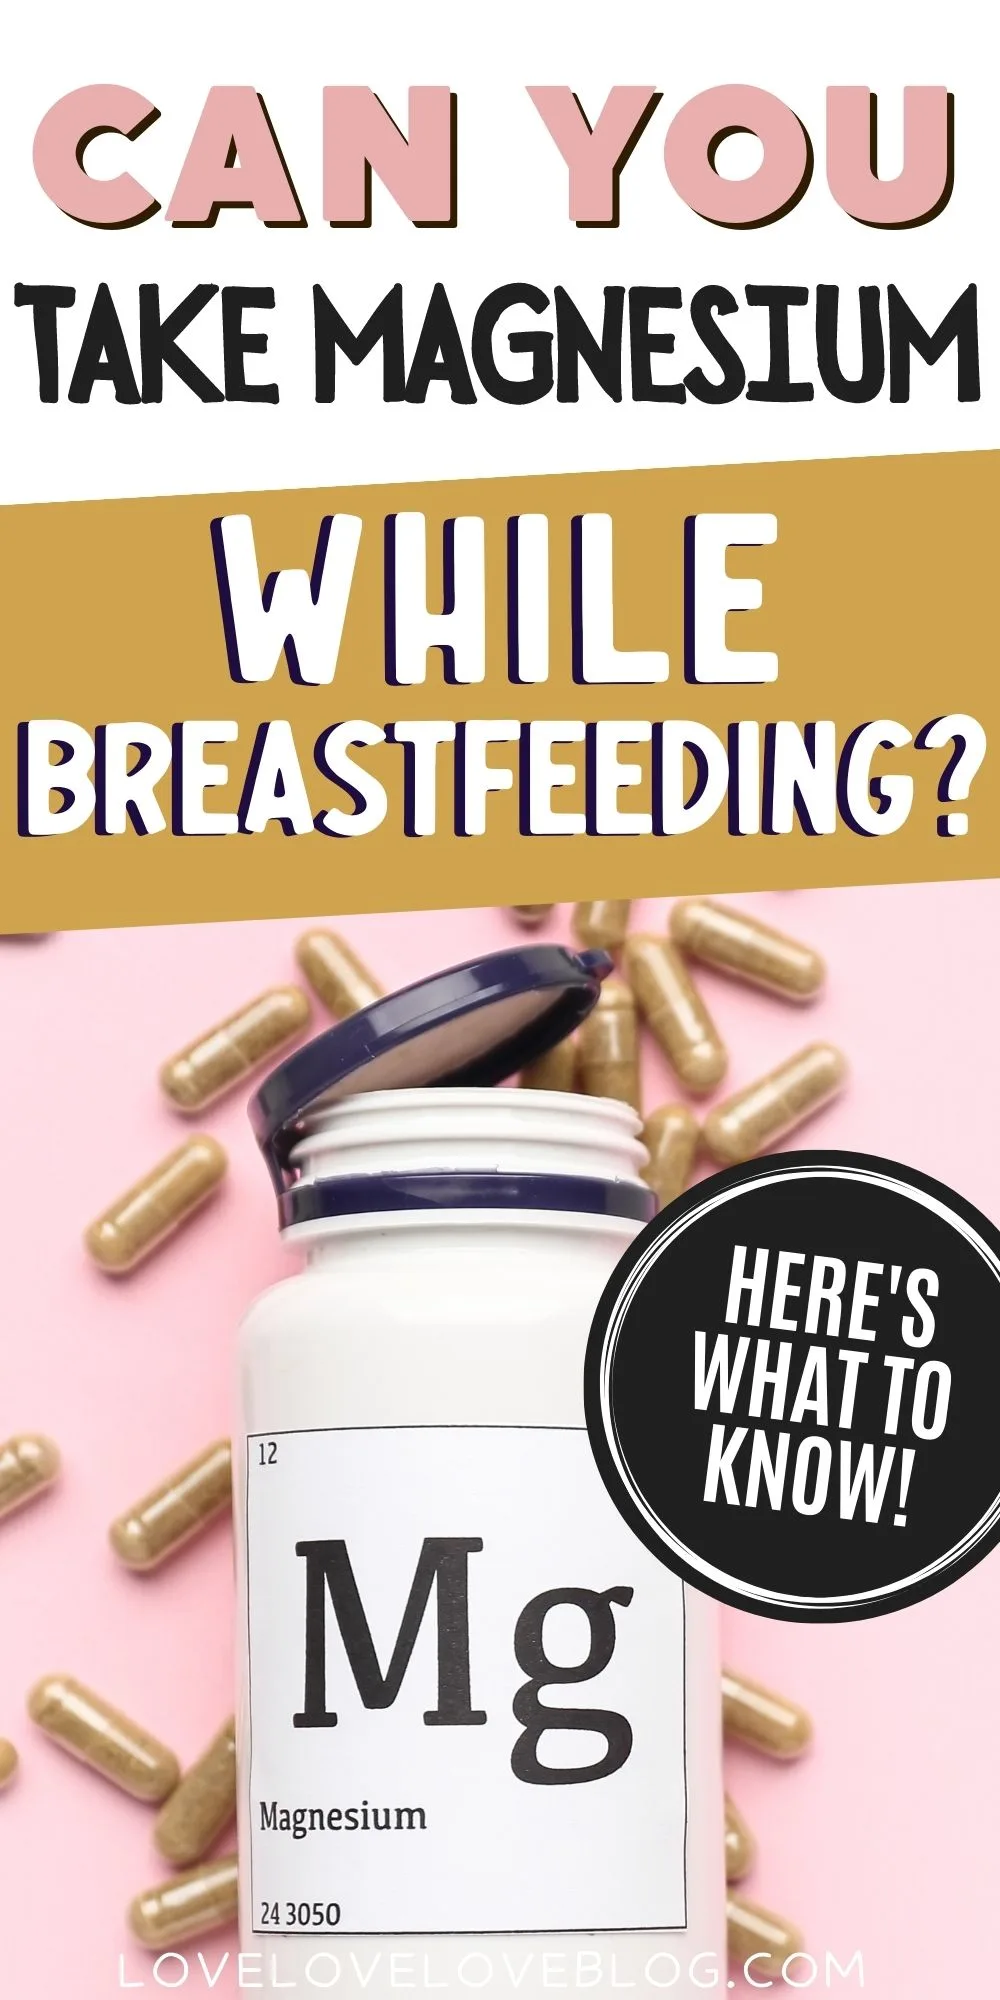 Pinterest graphic with text and a bottle of magnesium supplements on pink background.